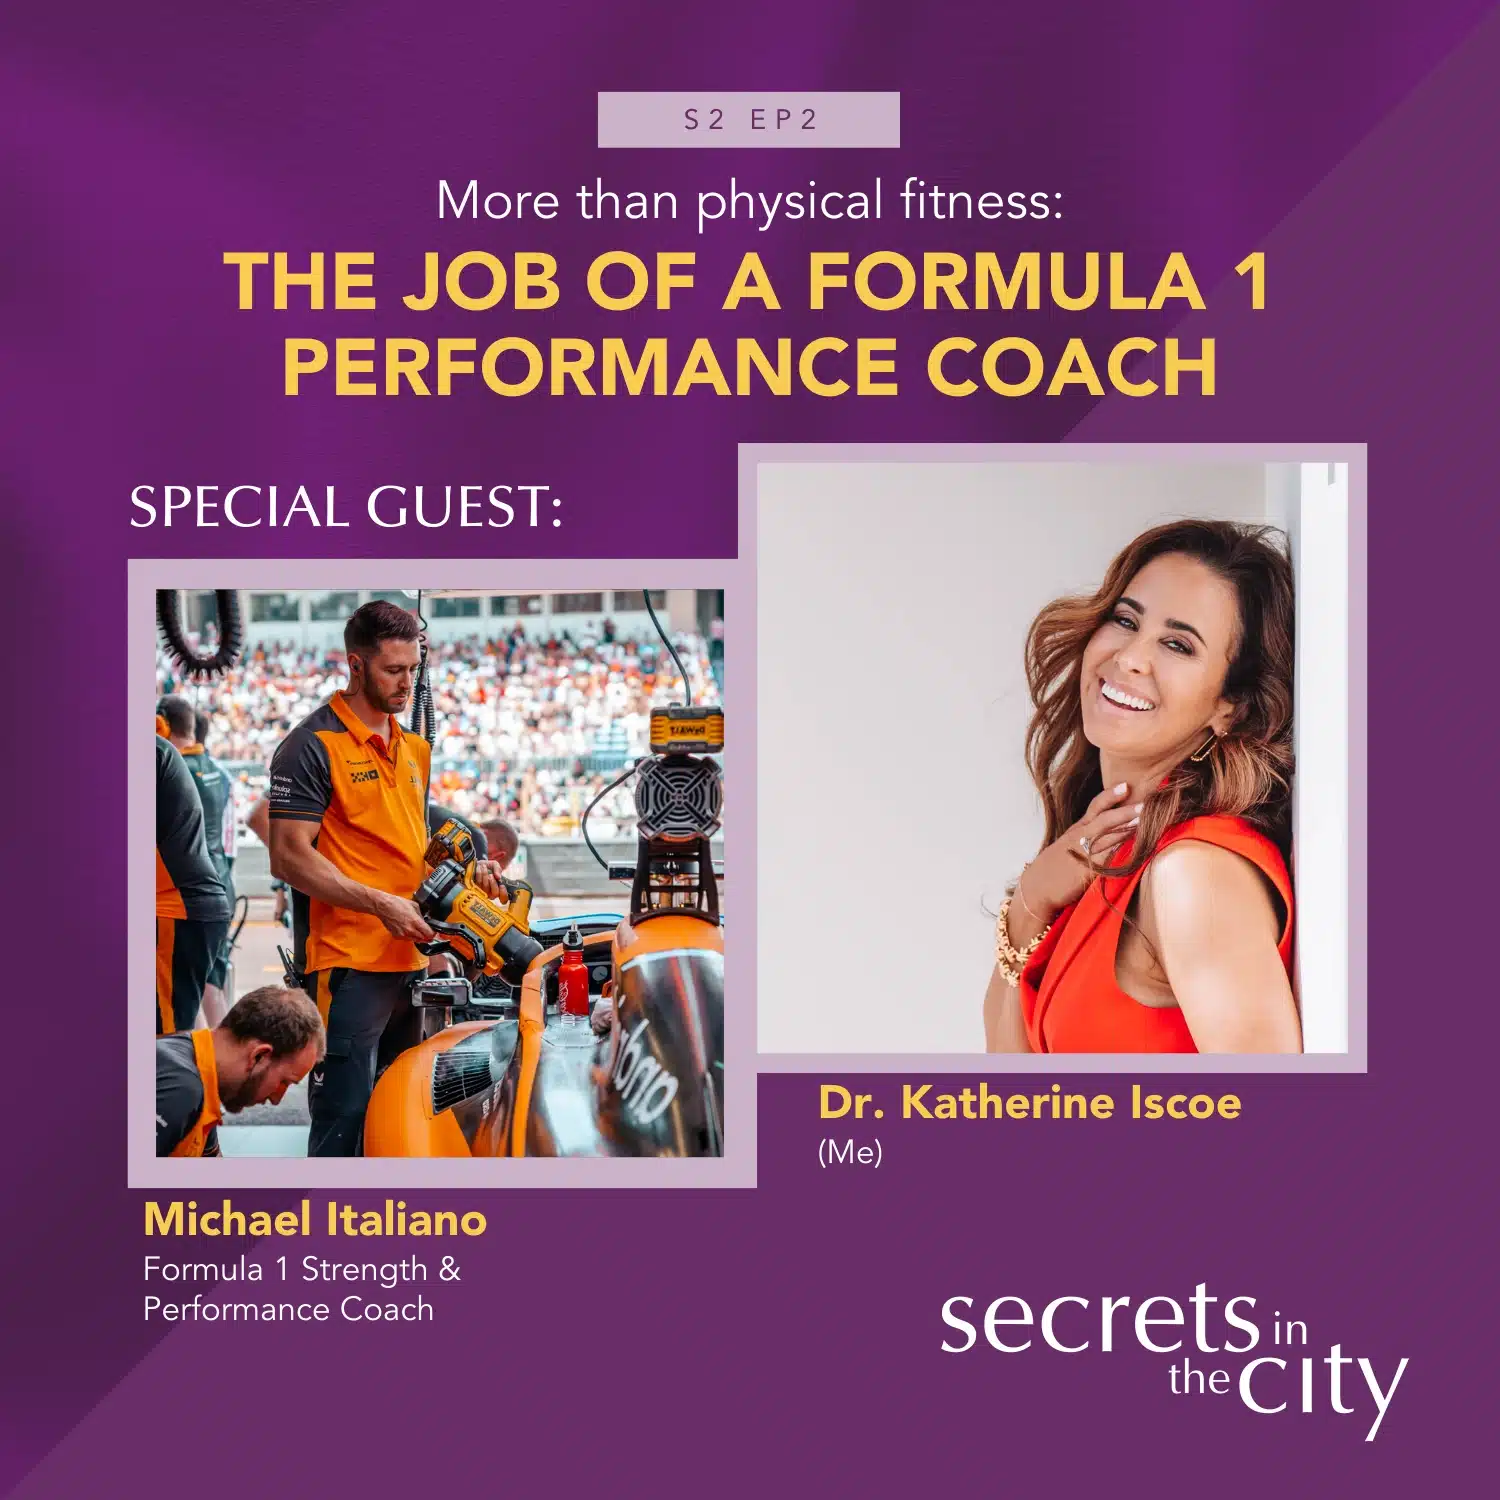 More Than Physical Fitness - Secrets in the City podcast cover featuring photos of Michael Italiano and Dr. Katherine Iscoe